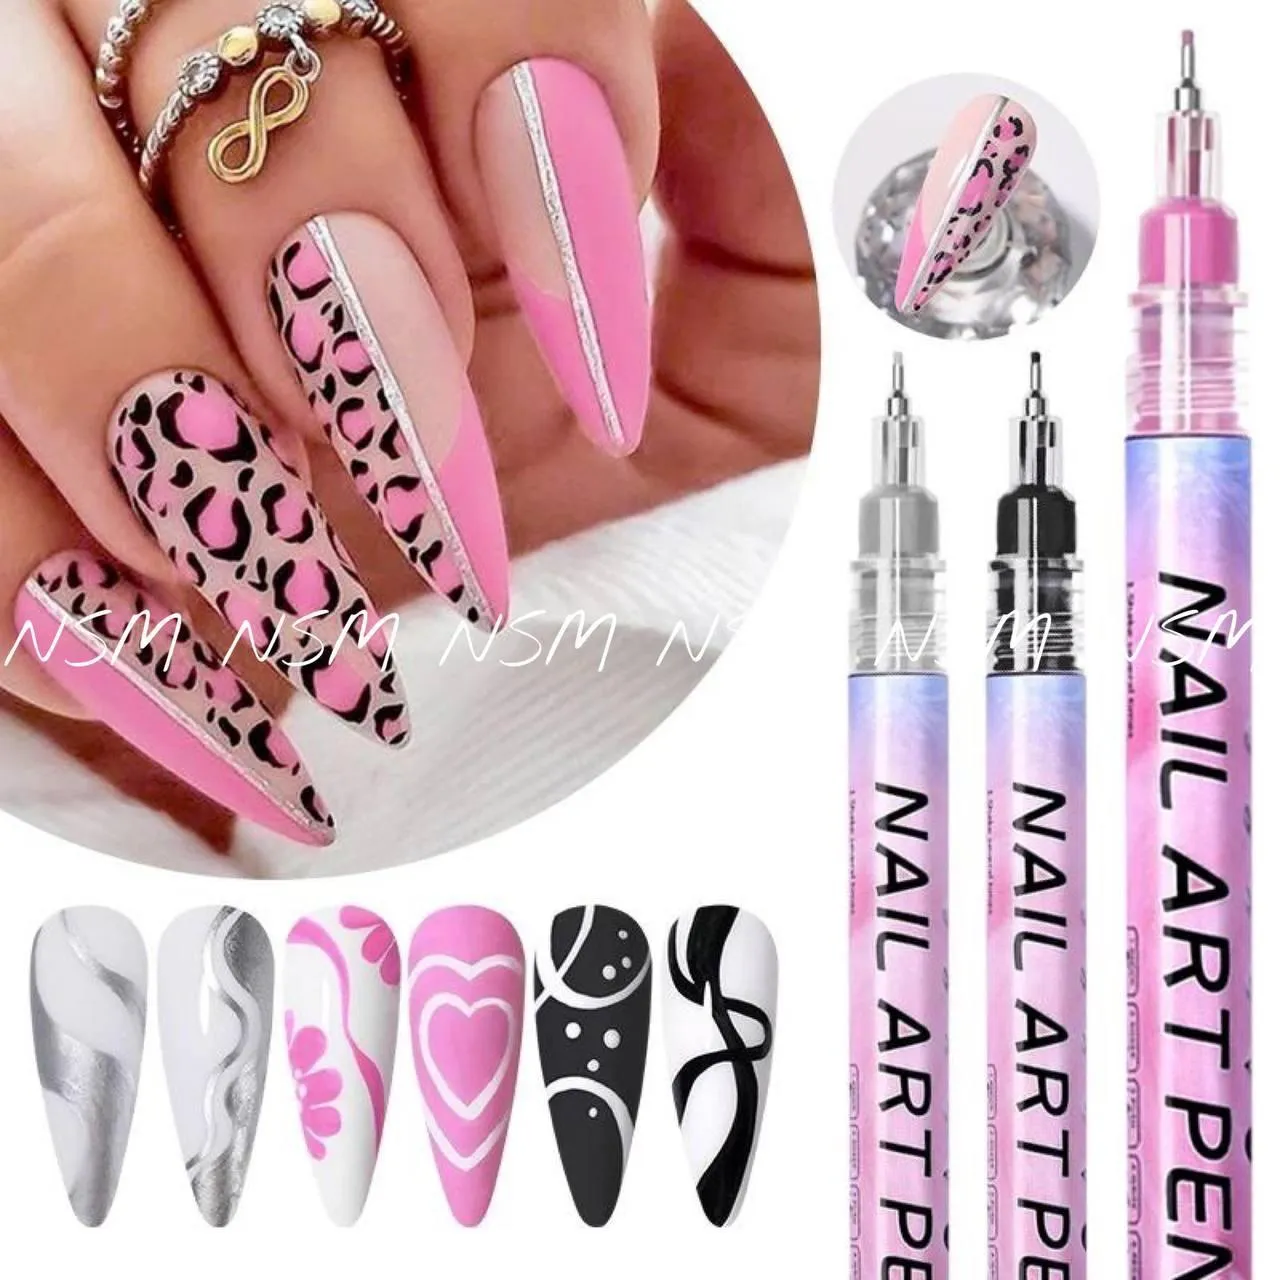 LikeUp New Gorgeous 100Pic transparent Reusable Artificial Nail Tips Best  False Nails with 3 sheet nail tab sticker Transparent - Price in India, Buy  LikeUp New Gorgeous 100Pic transparent Reusable Artificial Nail